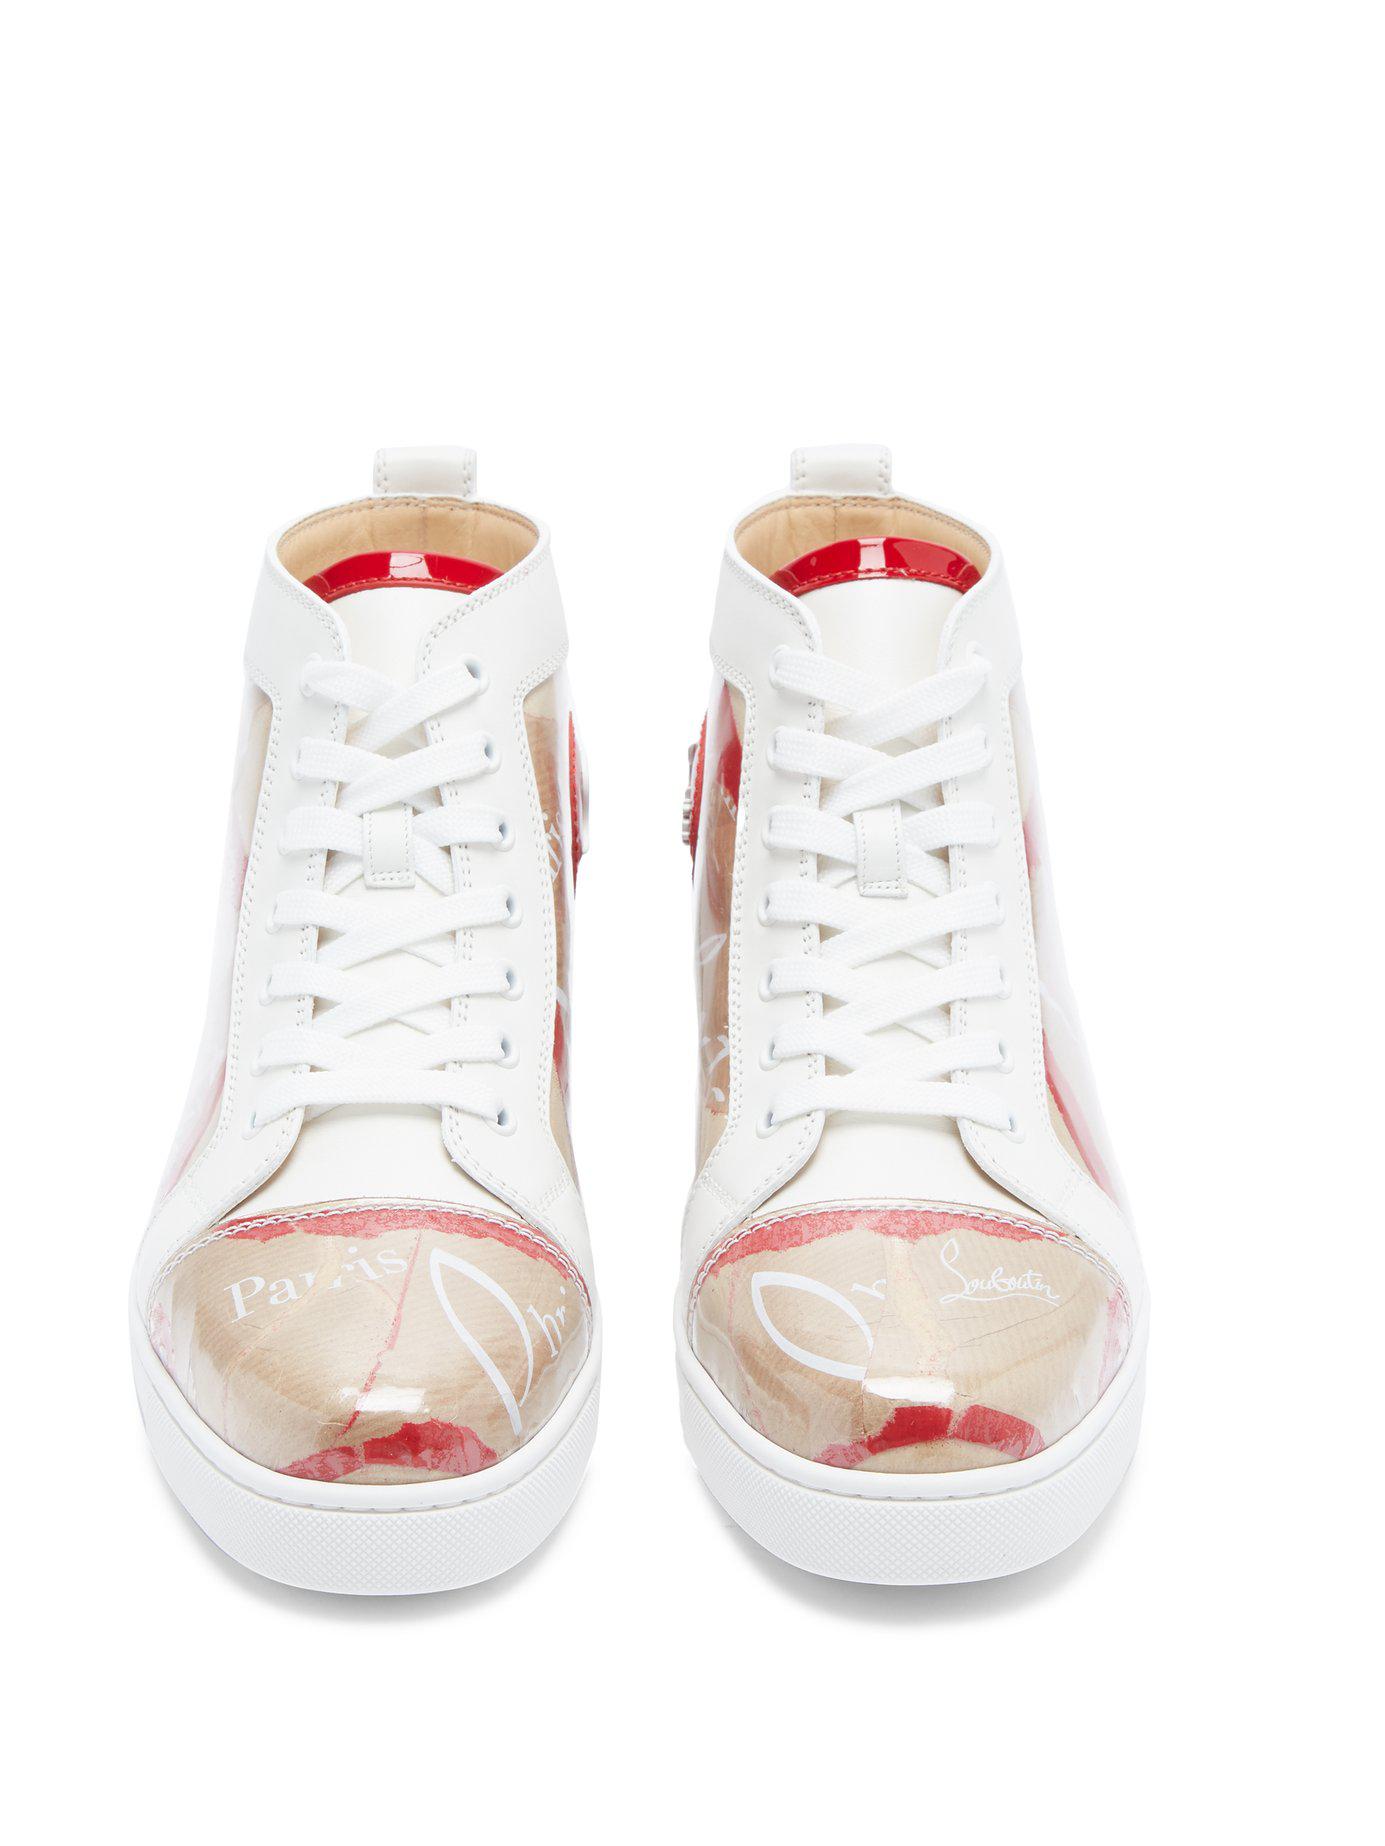 Christian Louboutin Louis Kraft Leather And Pvc High Top Trainers - Lyst